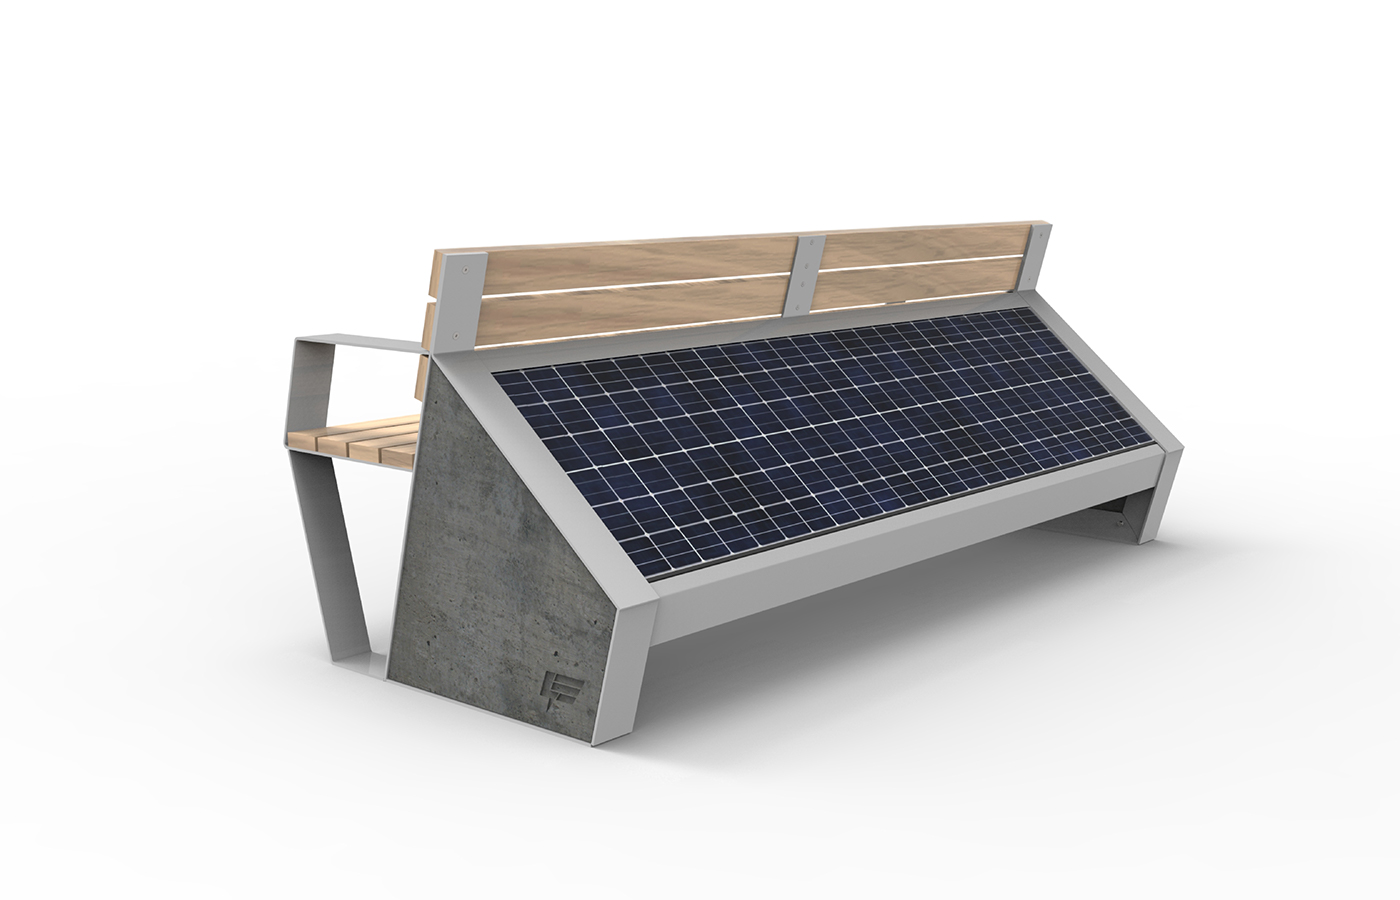 Solar bench industrial design  furniture city solar bench architecture Technology